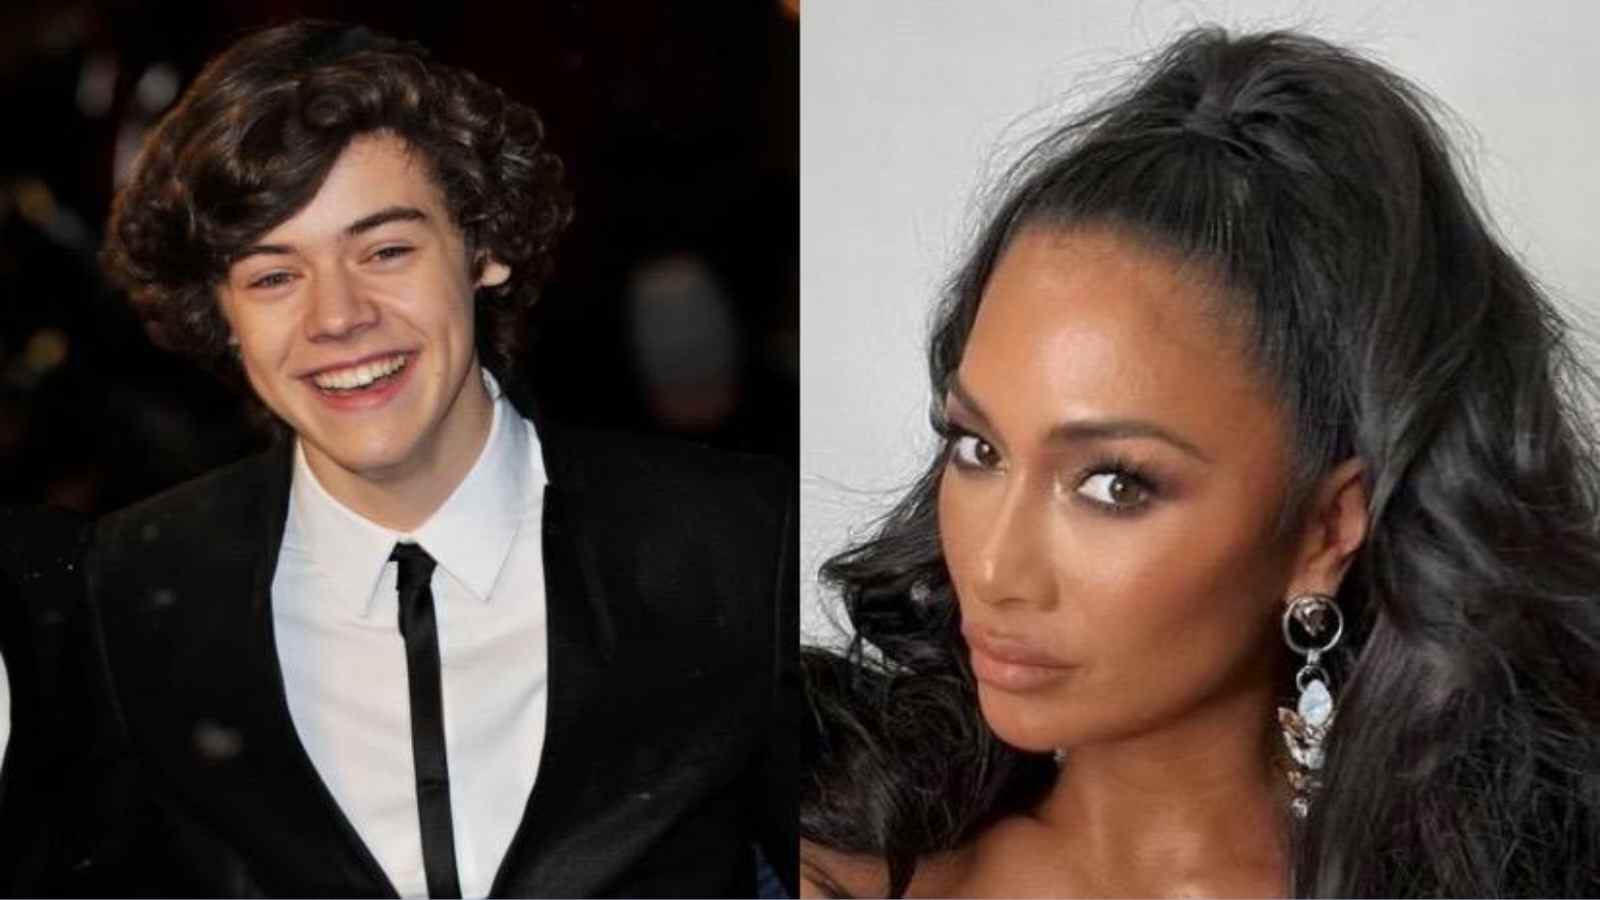 Nicole Sherzinger and Harry Styles hooked up in 2013 when Harry was 19 and she was 35